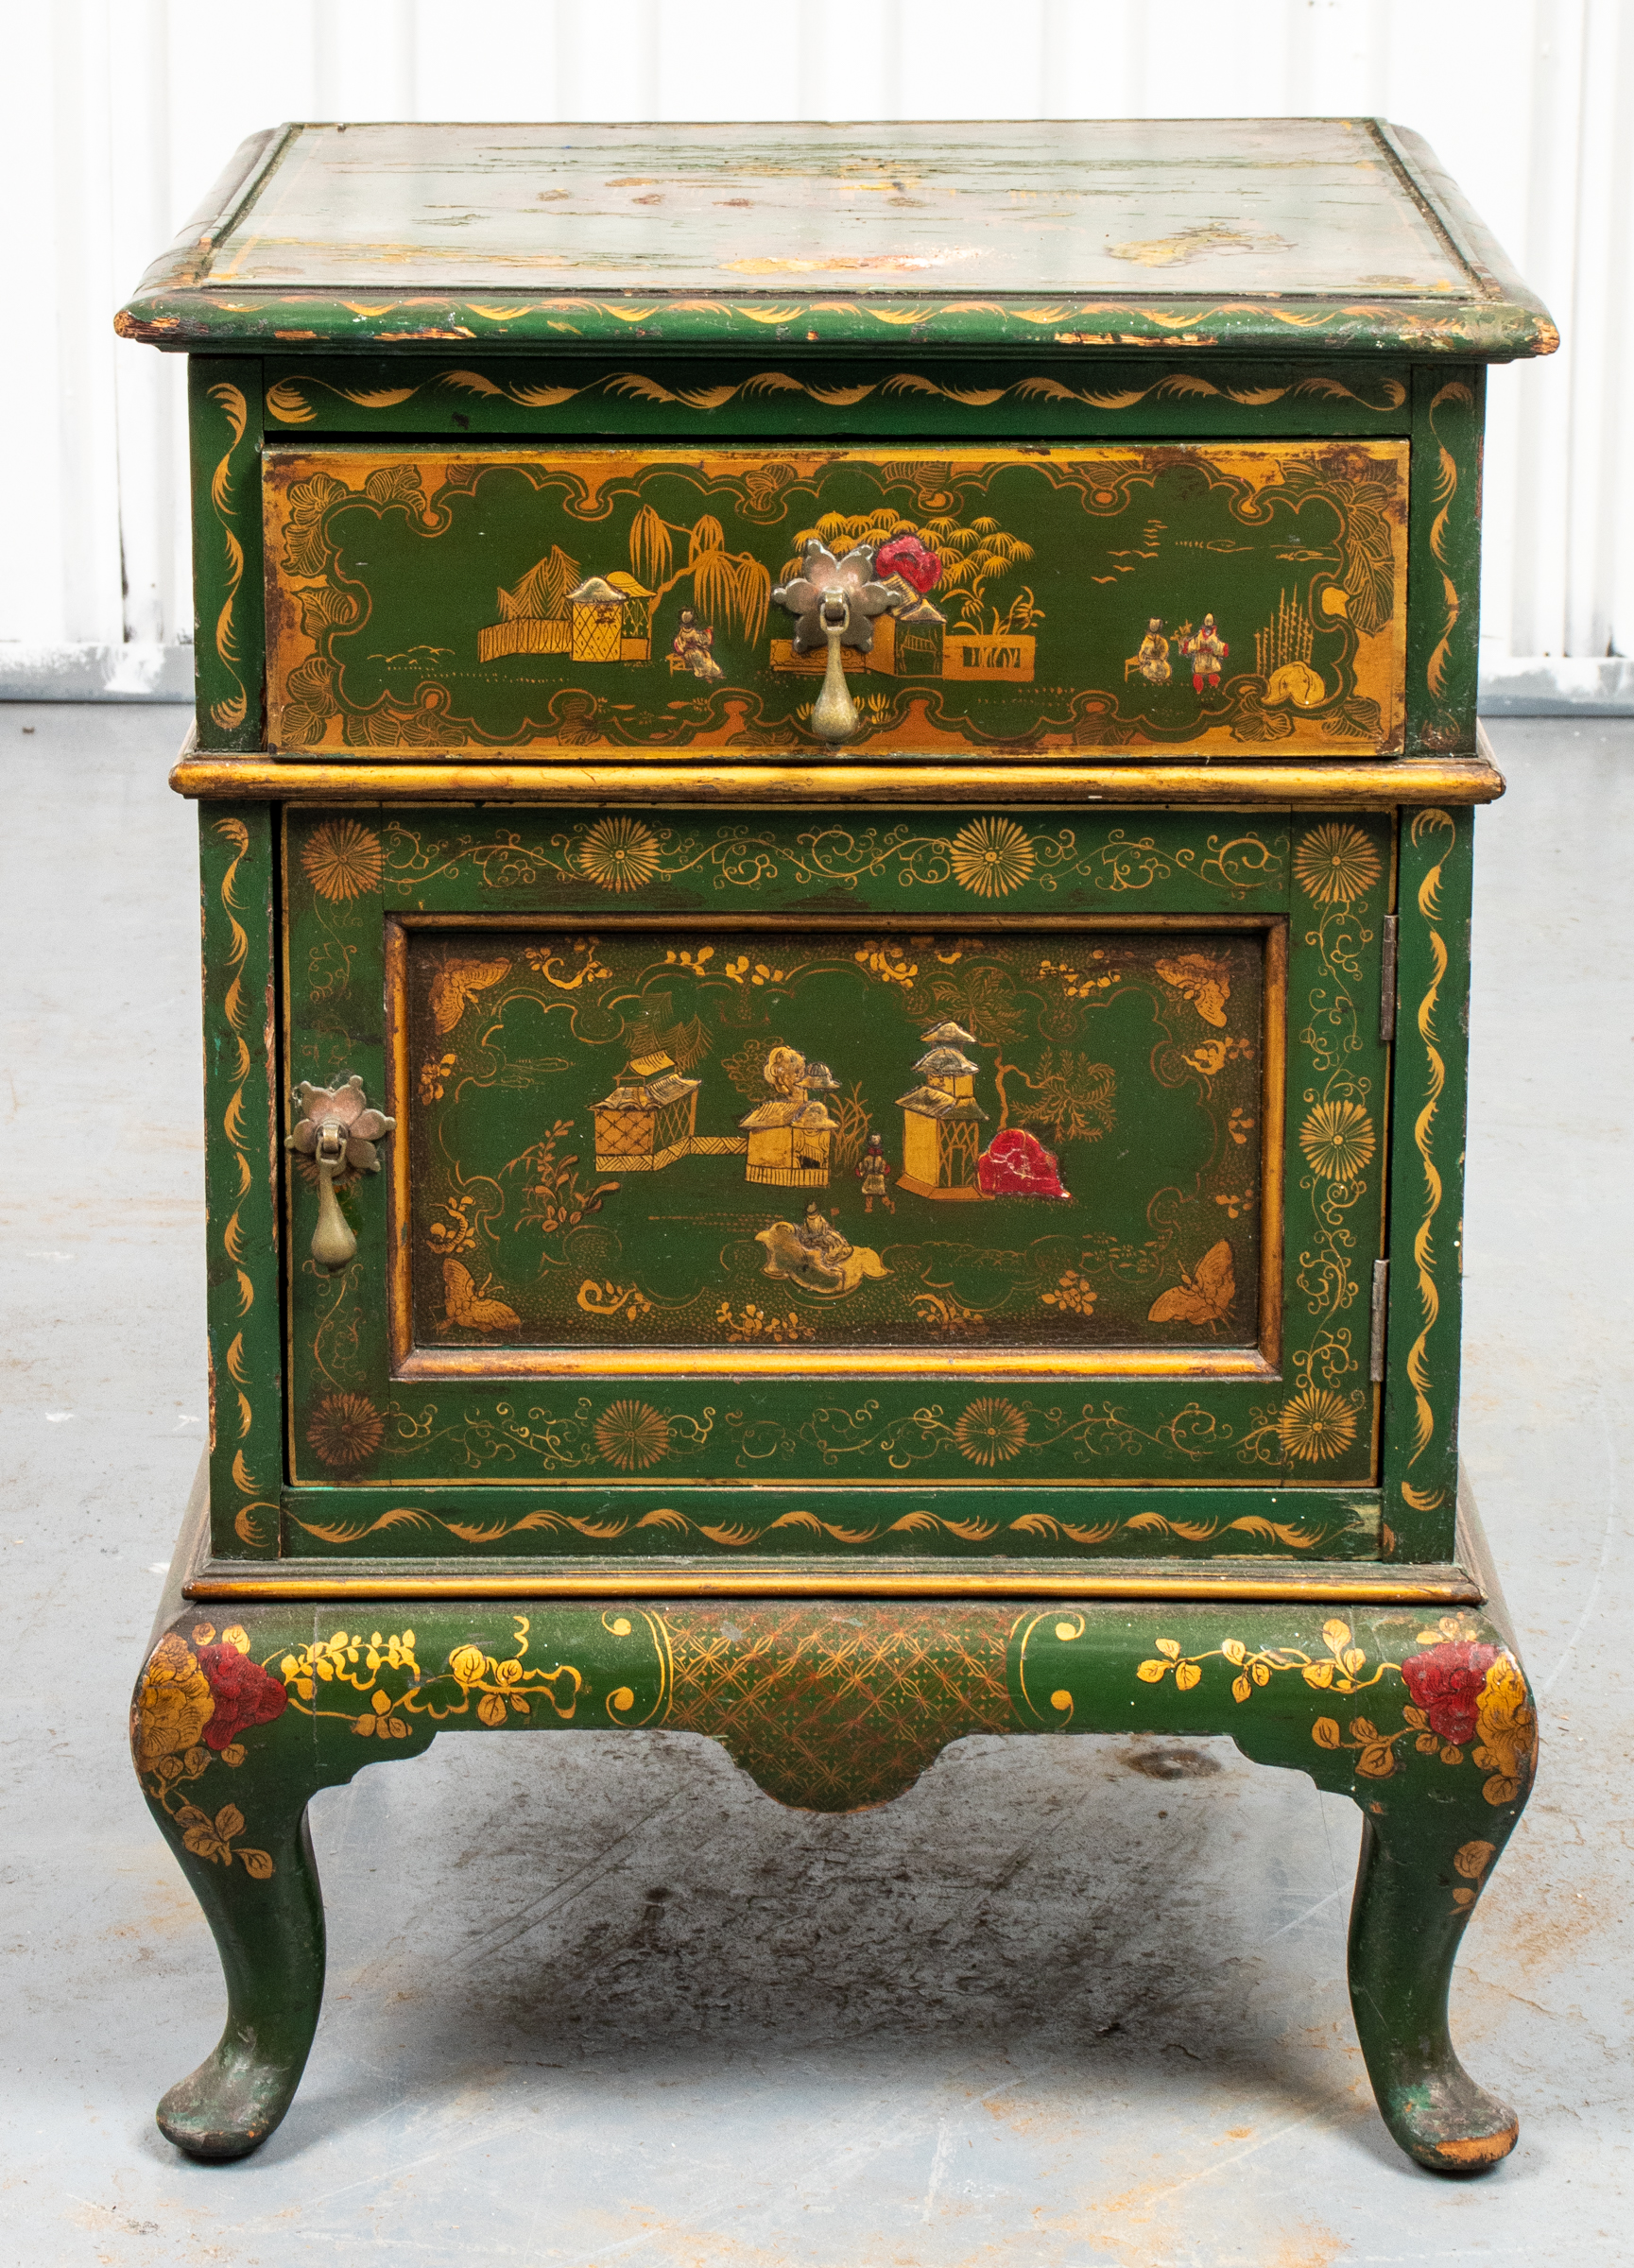 GREEN CHINOISERIE DECORATED BEDSIDE